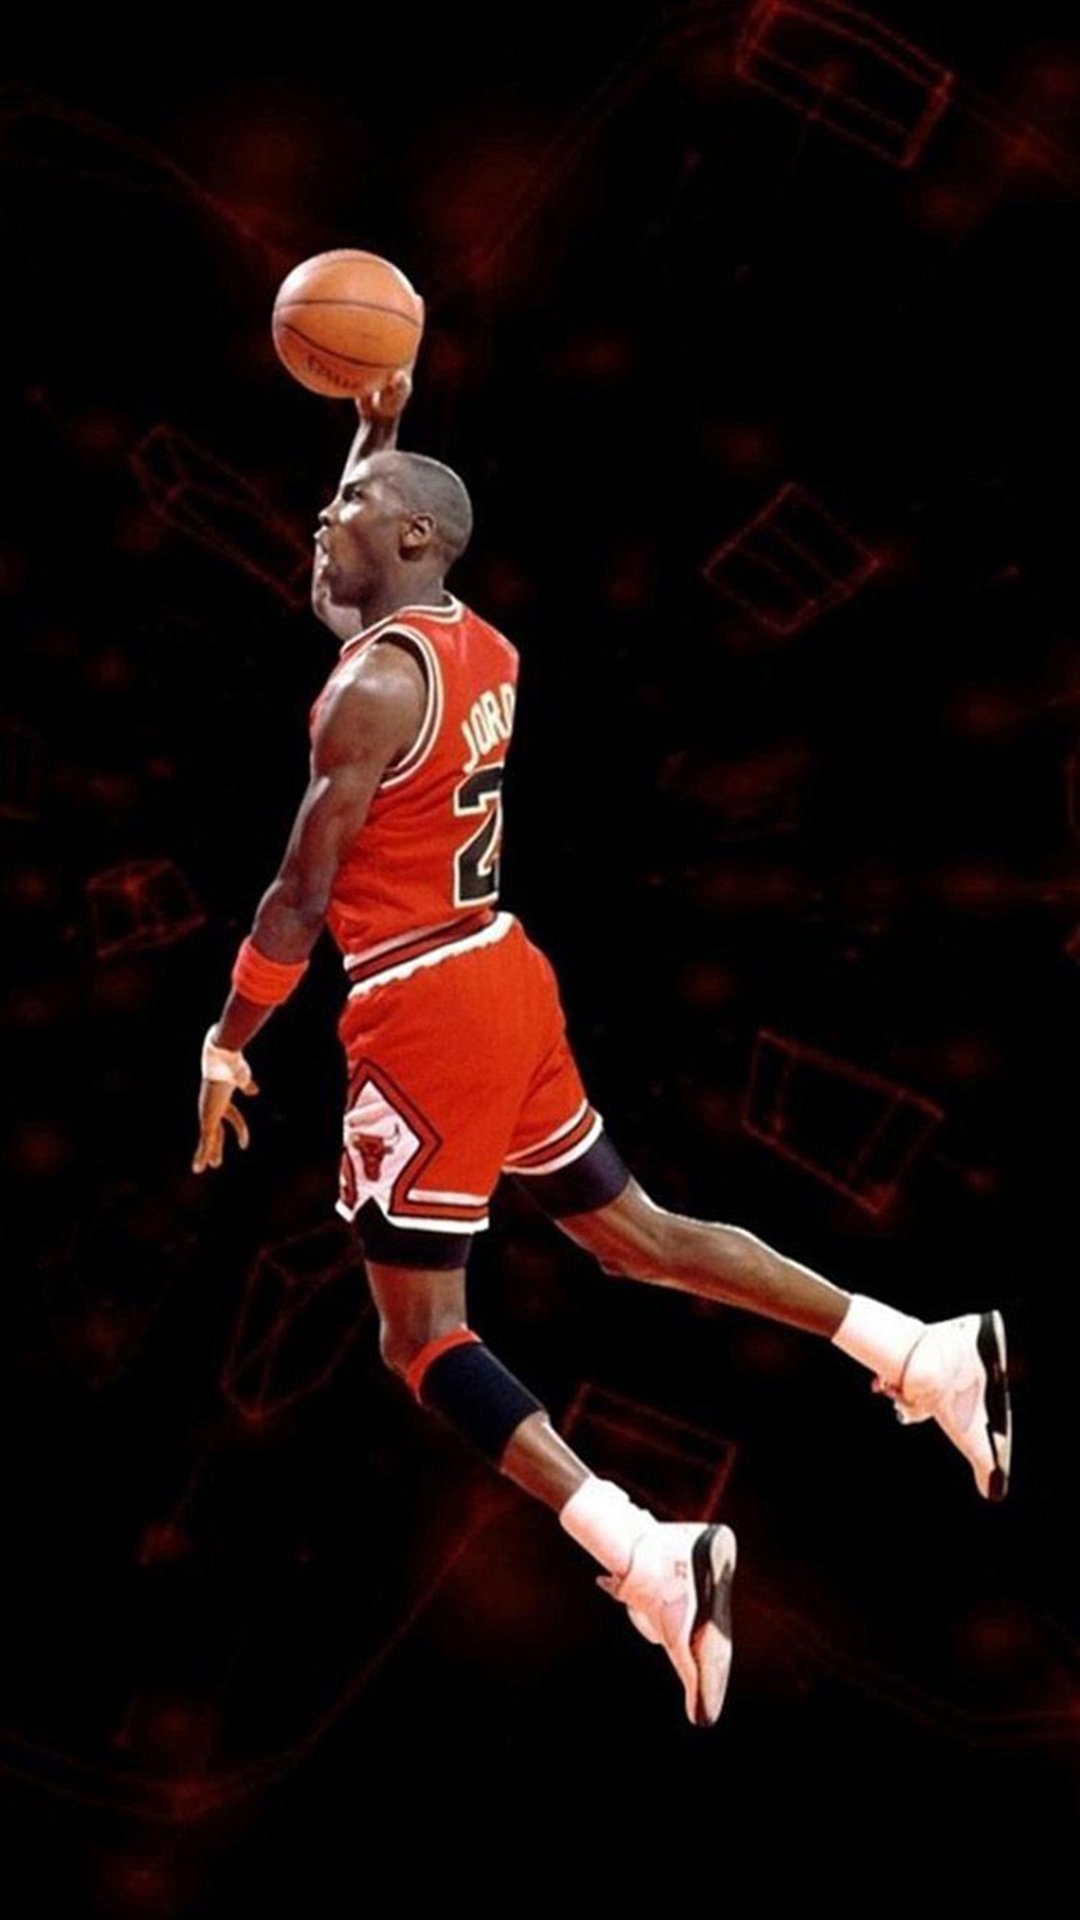 Cool Sports Wallpaper for iPhone